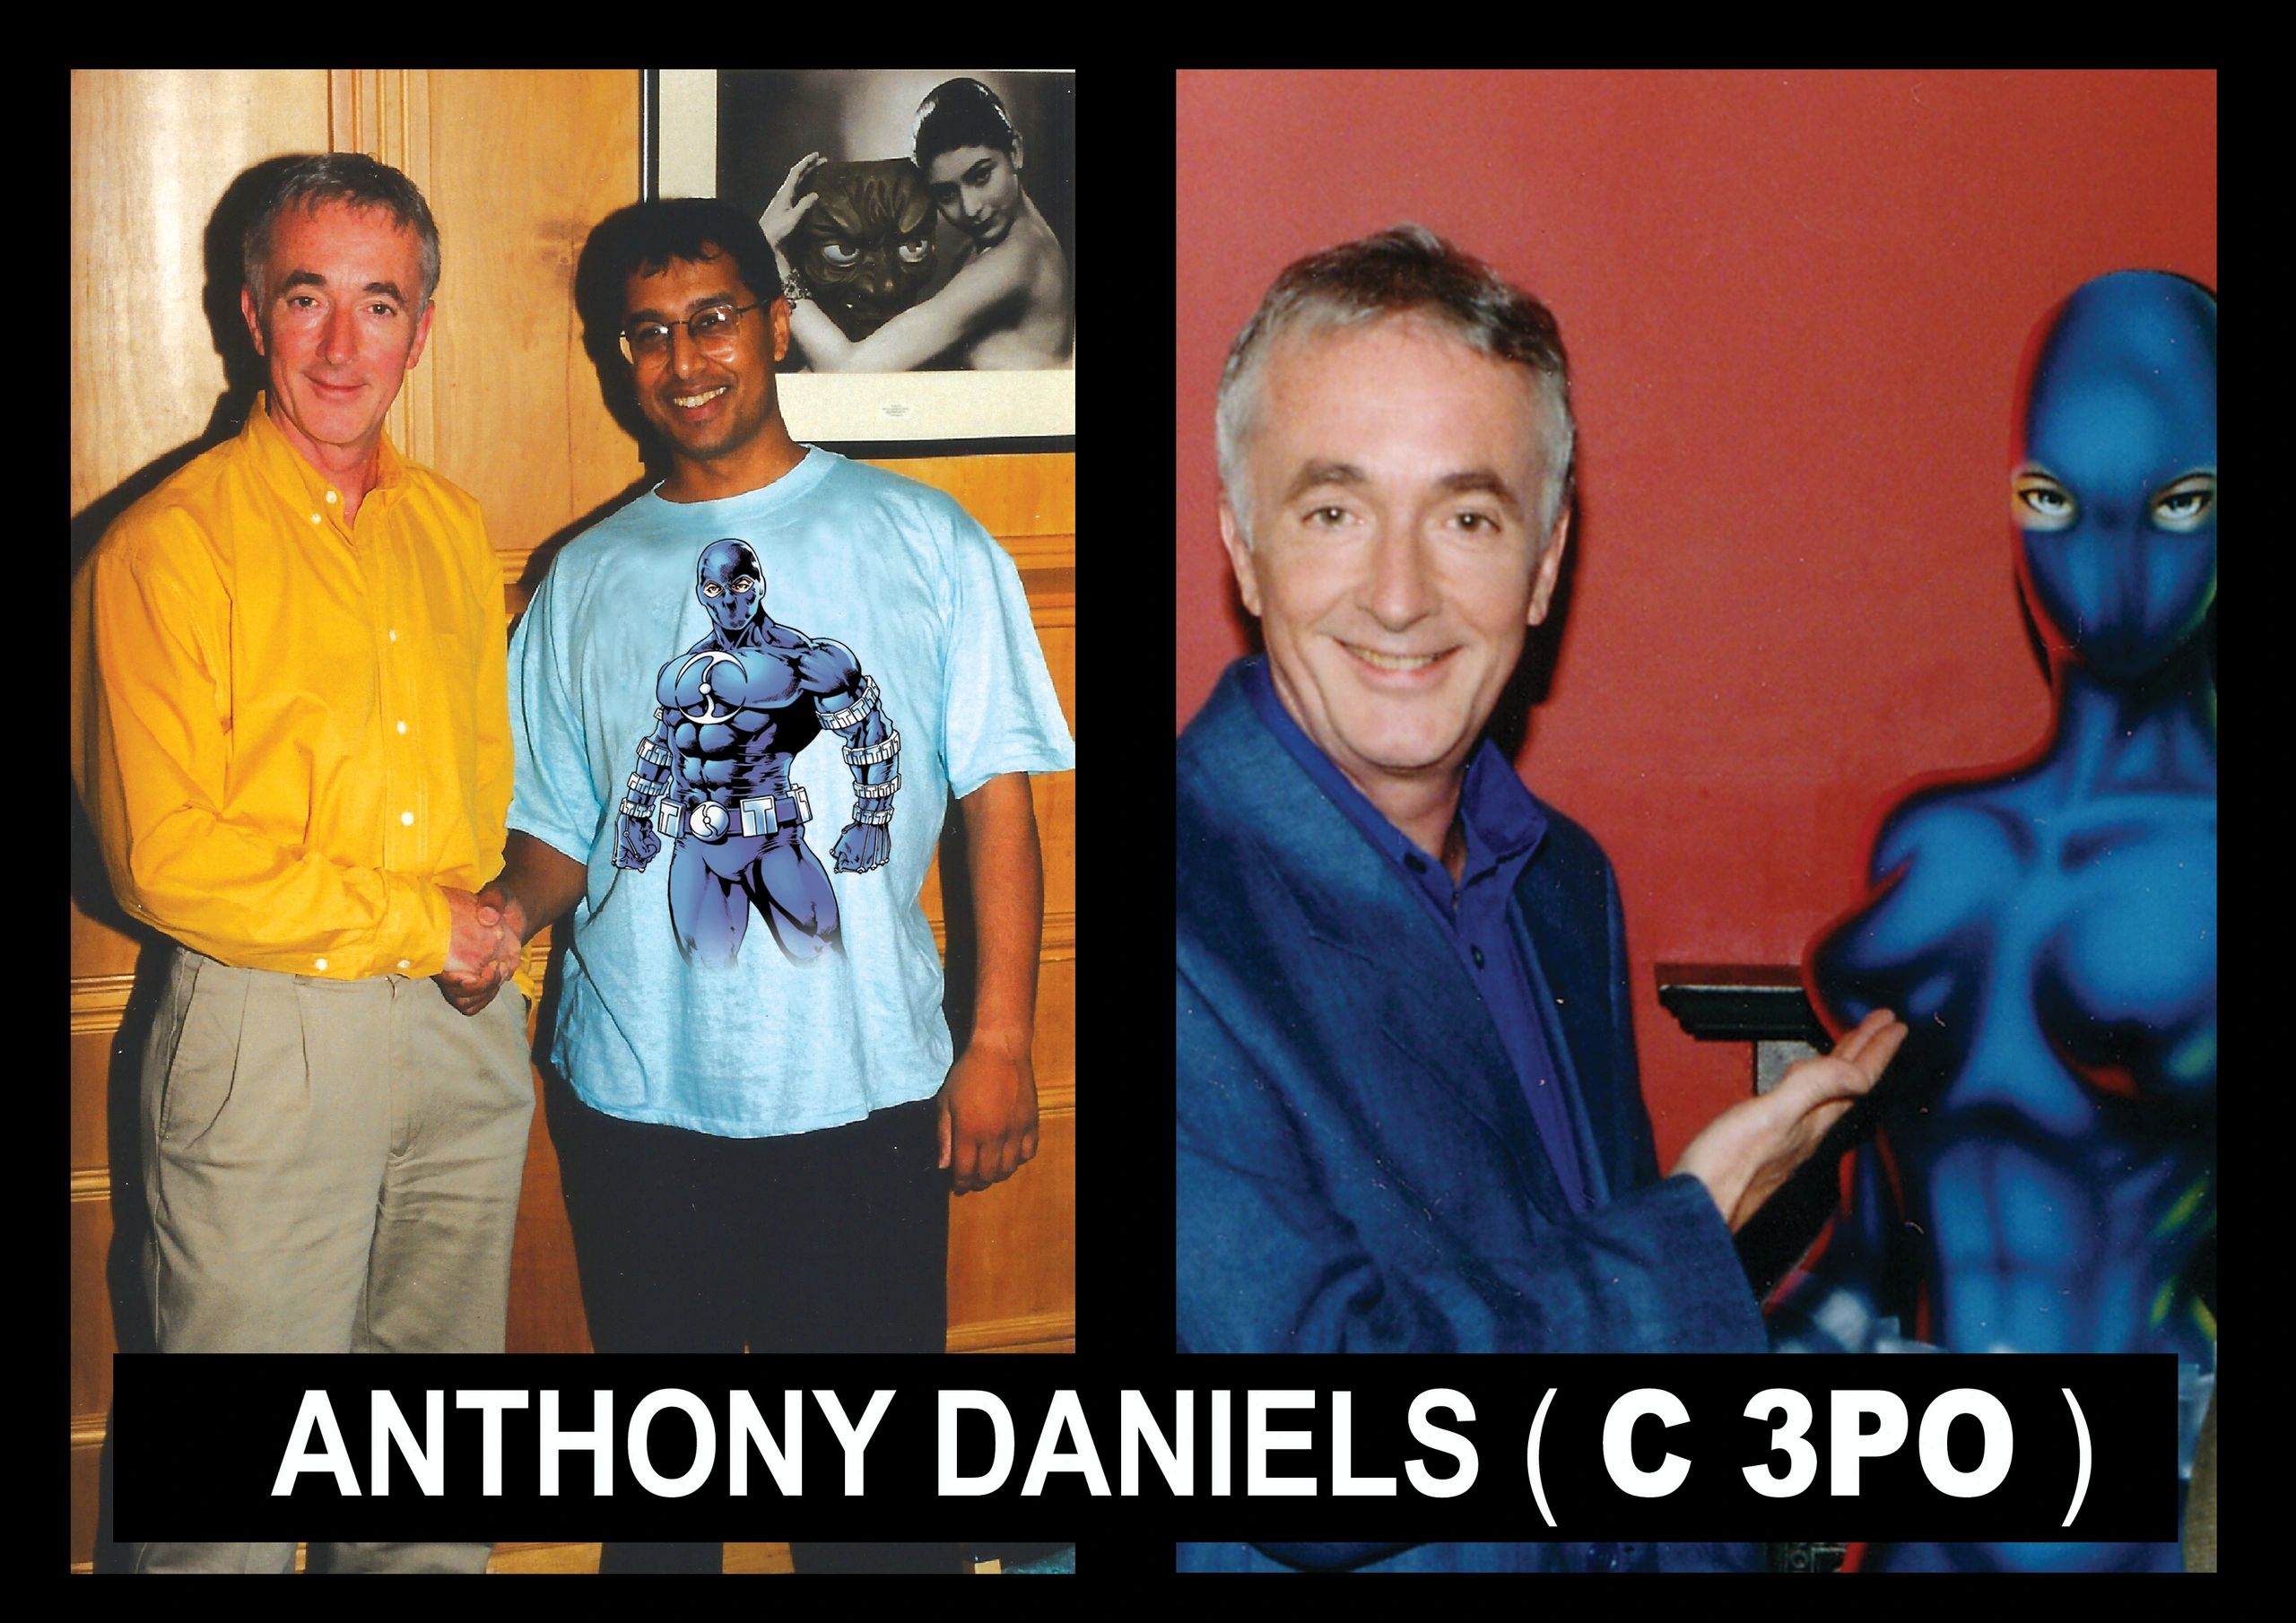 THE DARK SIDE OF THE FORCE.COM interviews presents ANTHONY DANIELS the actor who played C 3PO